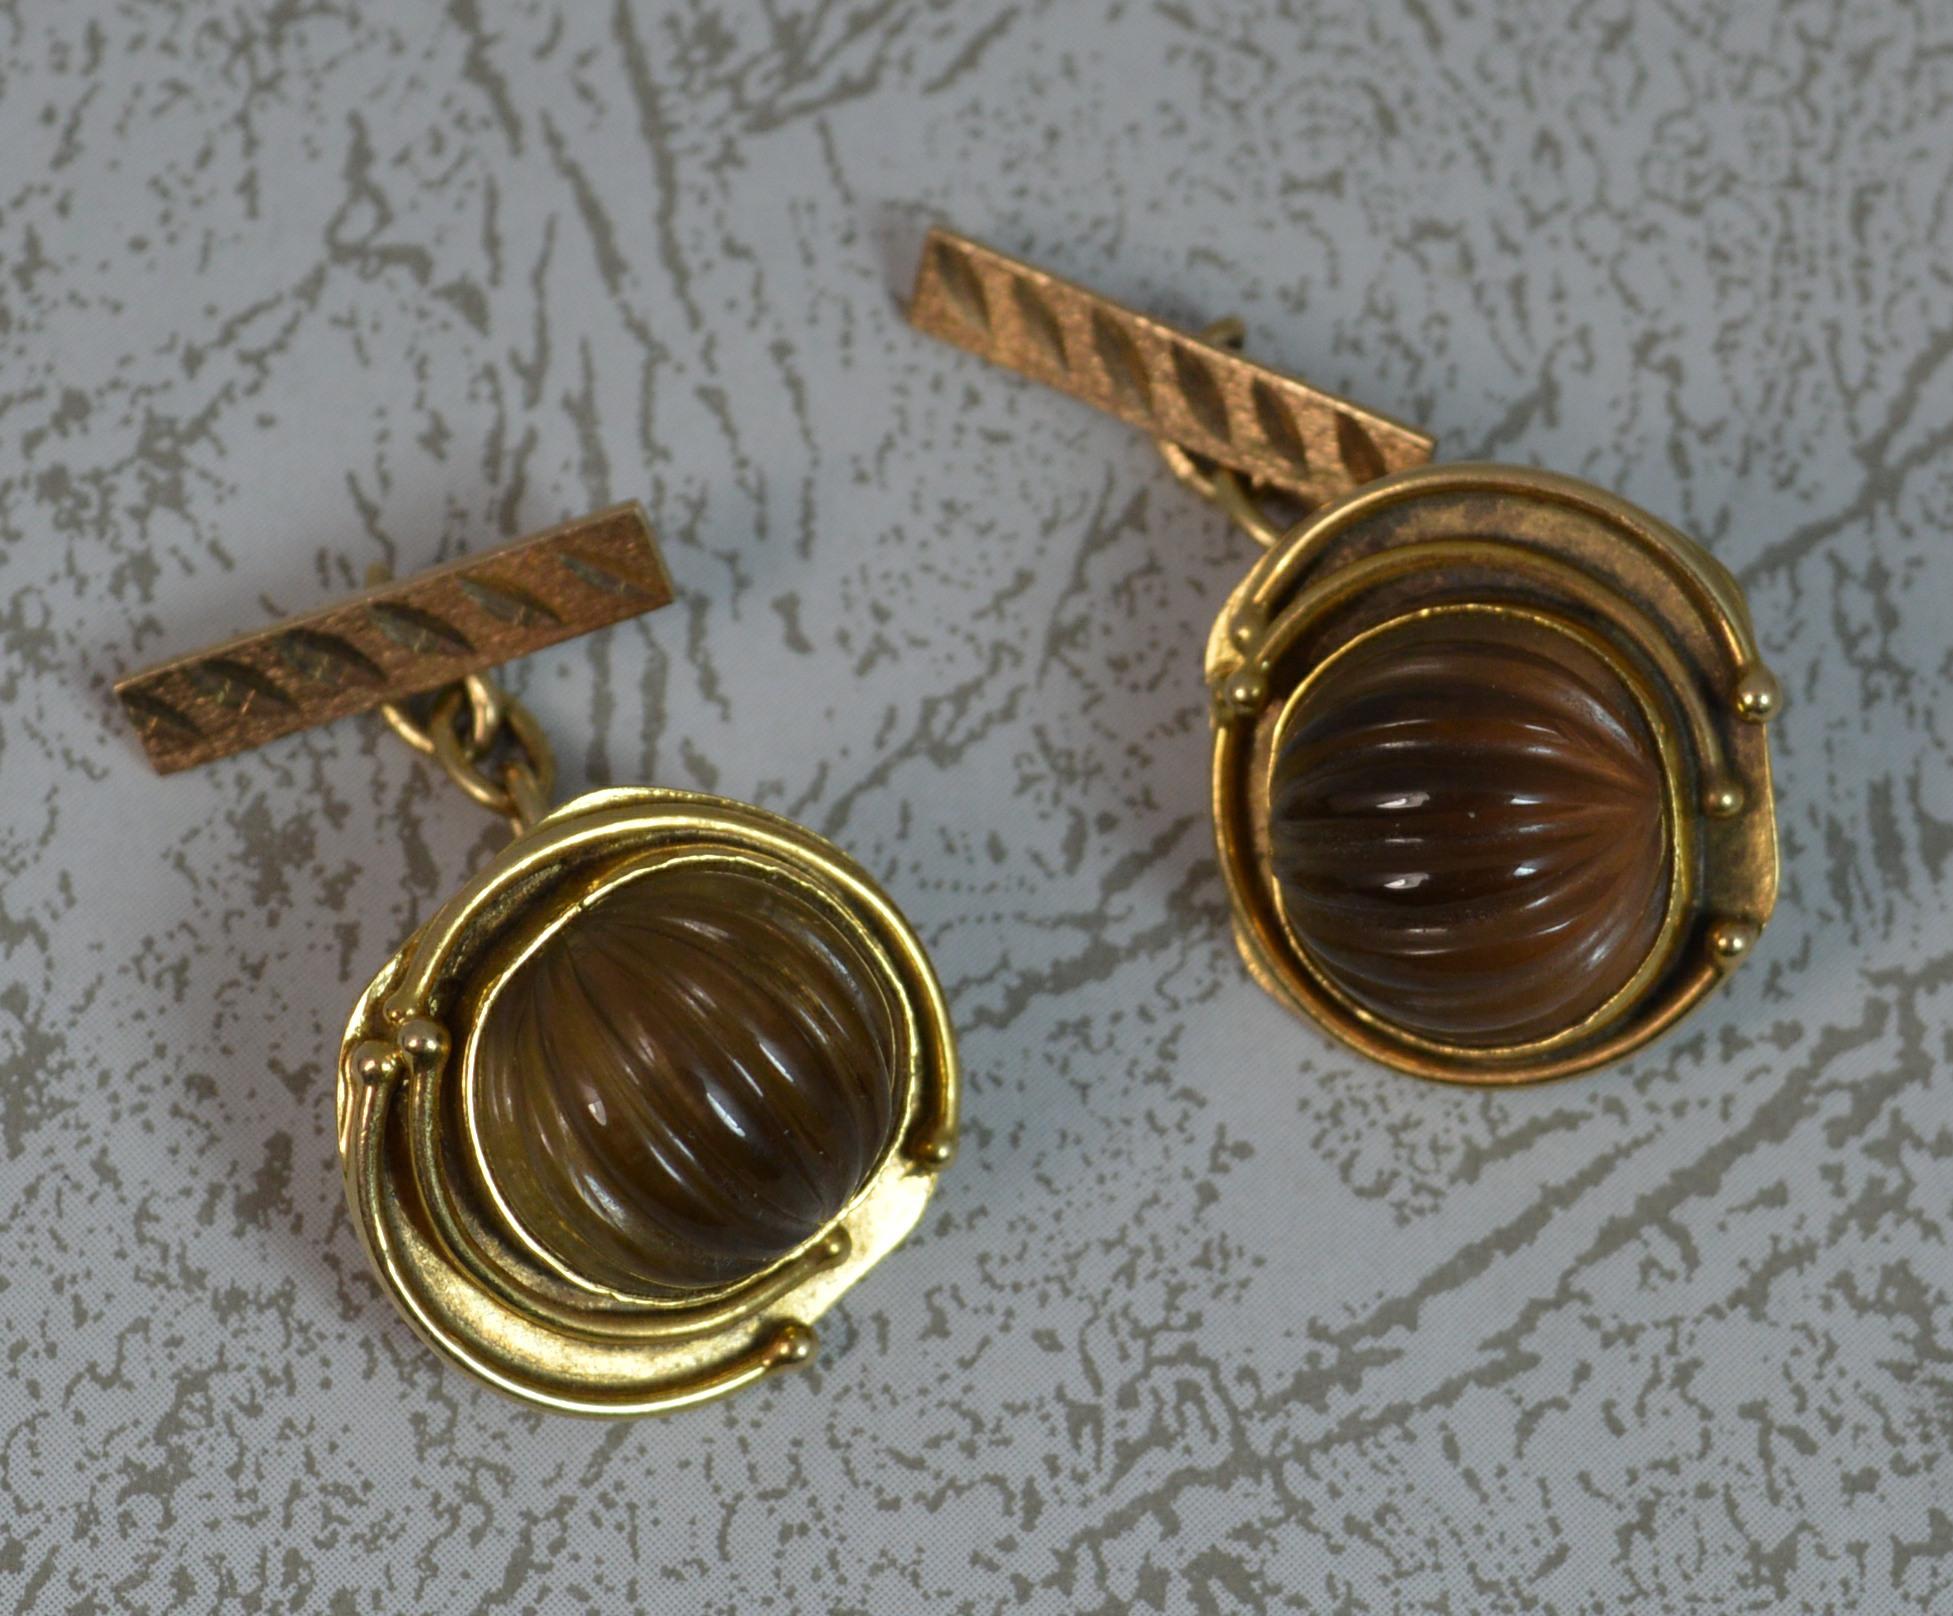 A highly unusual pair of retro cufflinks.
Solid 9 carat yellow gold example.
Designed with a single hand carved smoky quartz to one half with a gold tubing surround.

CONDITION ; Excellent. Securely set stones, issue free. Crisp gold, issue free.